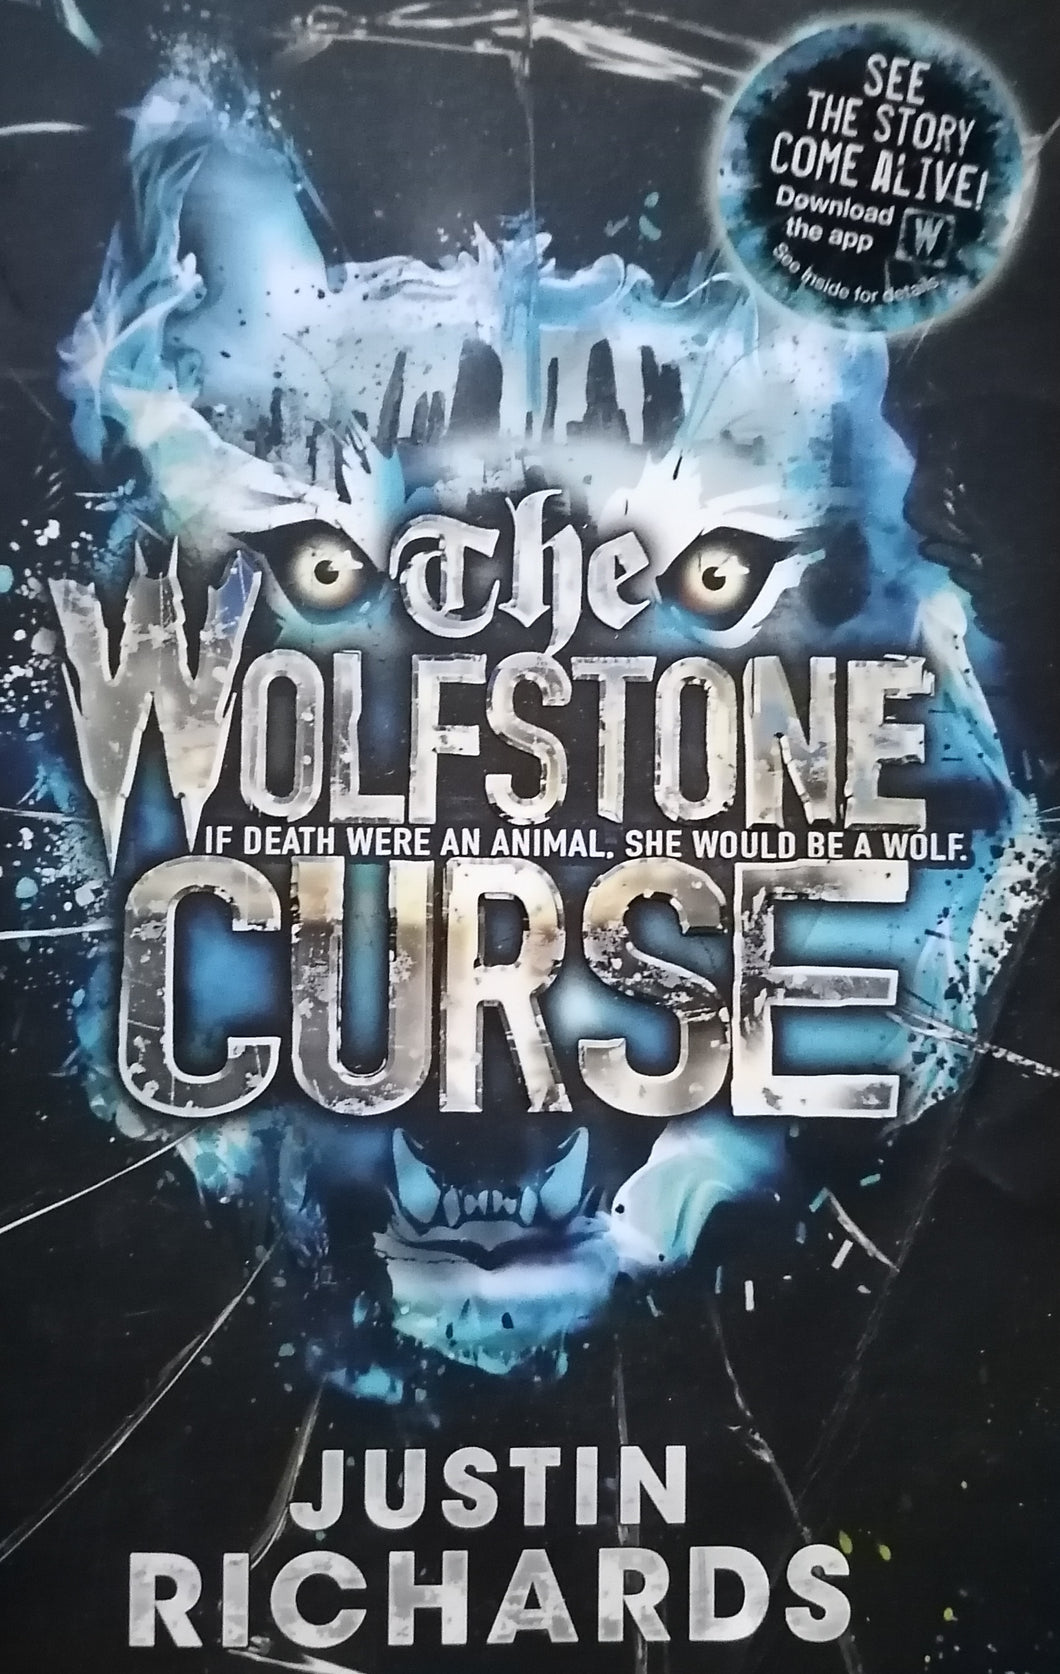 The WolfStone Curse 'If Death Were An Animal, She Would Be A Wolf.' by Justin Richards